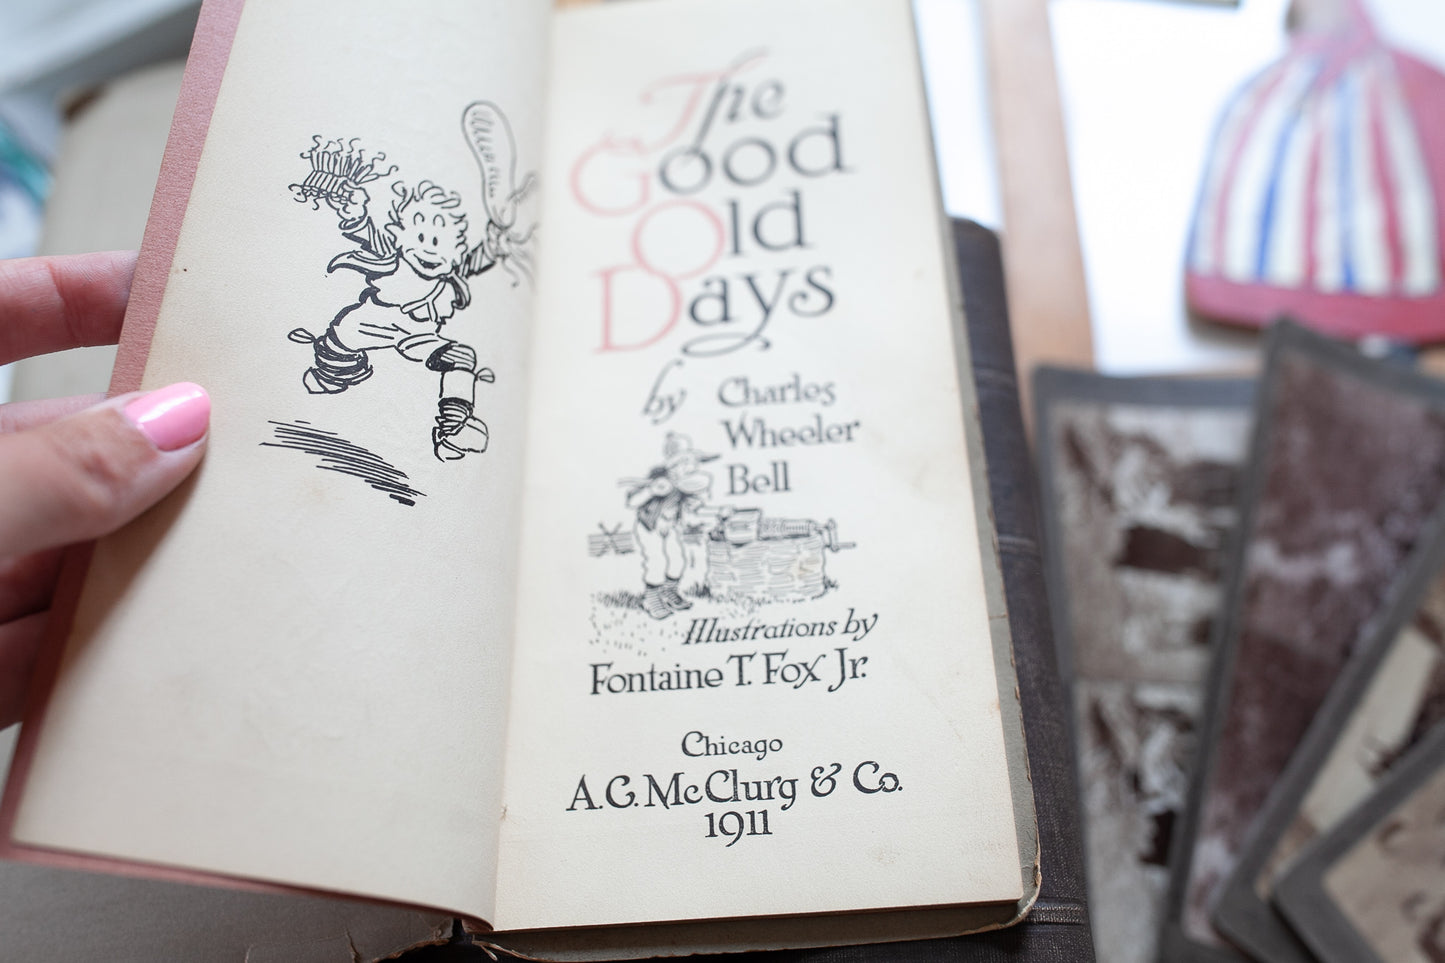 The Good Old Days - Book